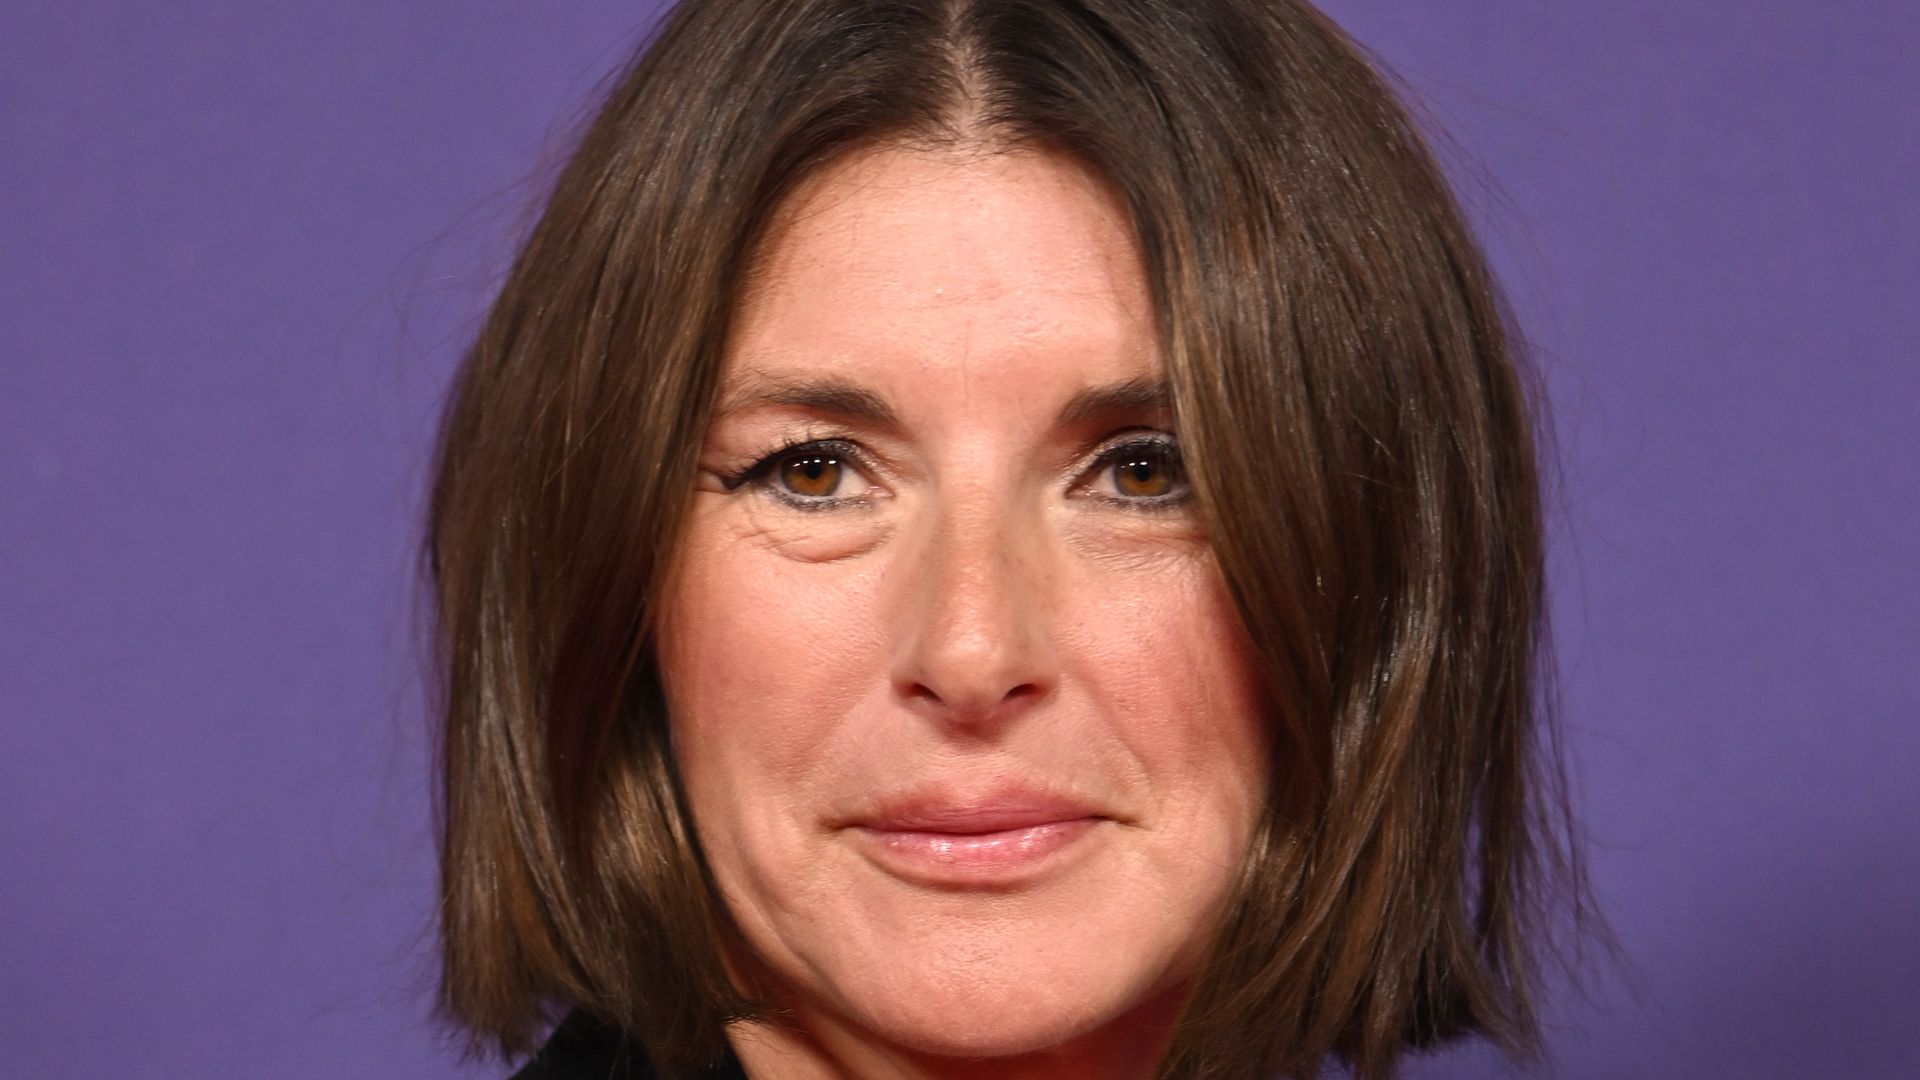 Jools Oliver at a film premiere with hair in a bob